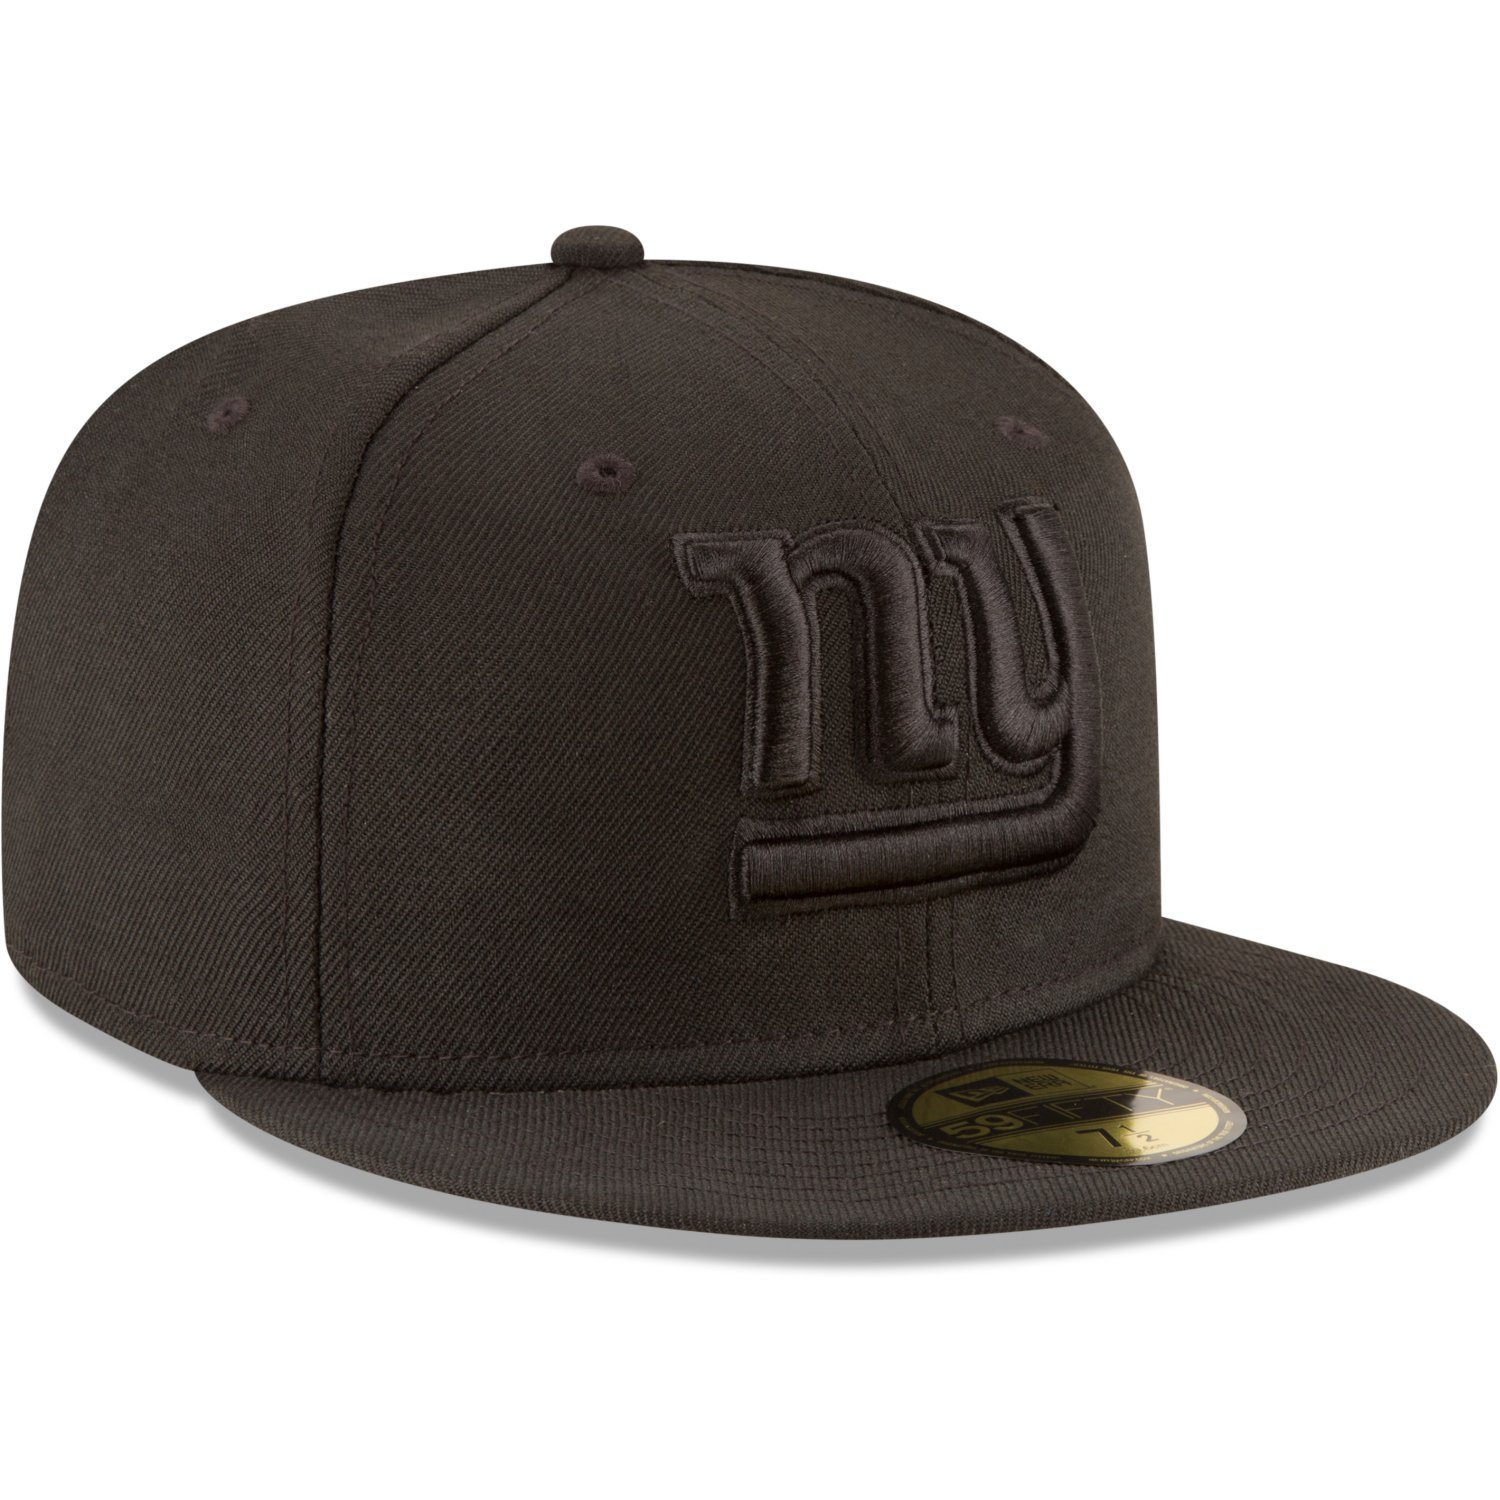 Era New Cap 59Fifty NFL Giants New Fitted York